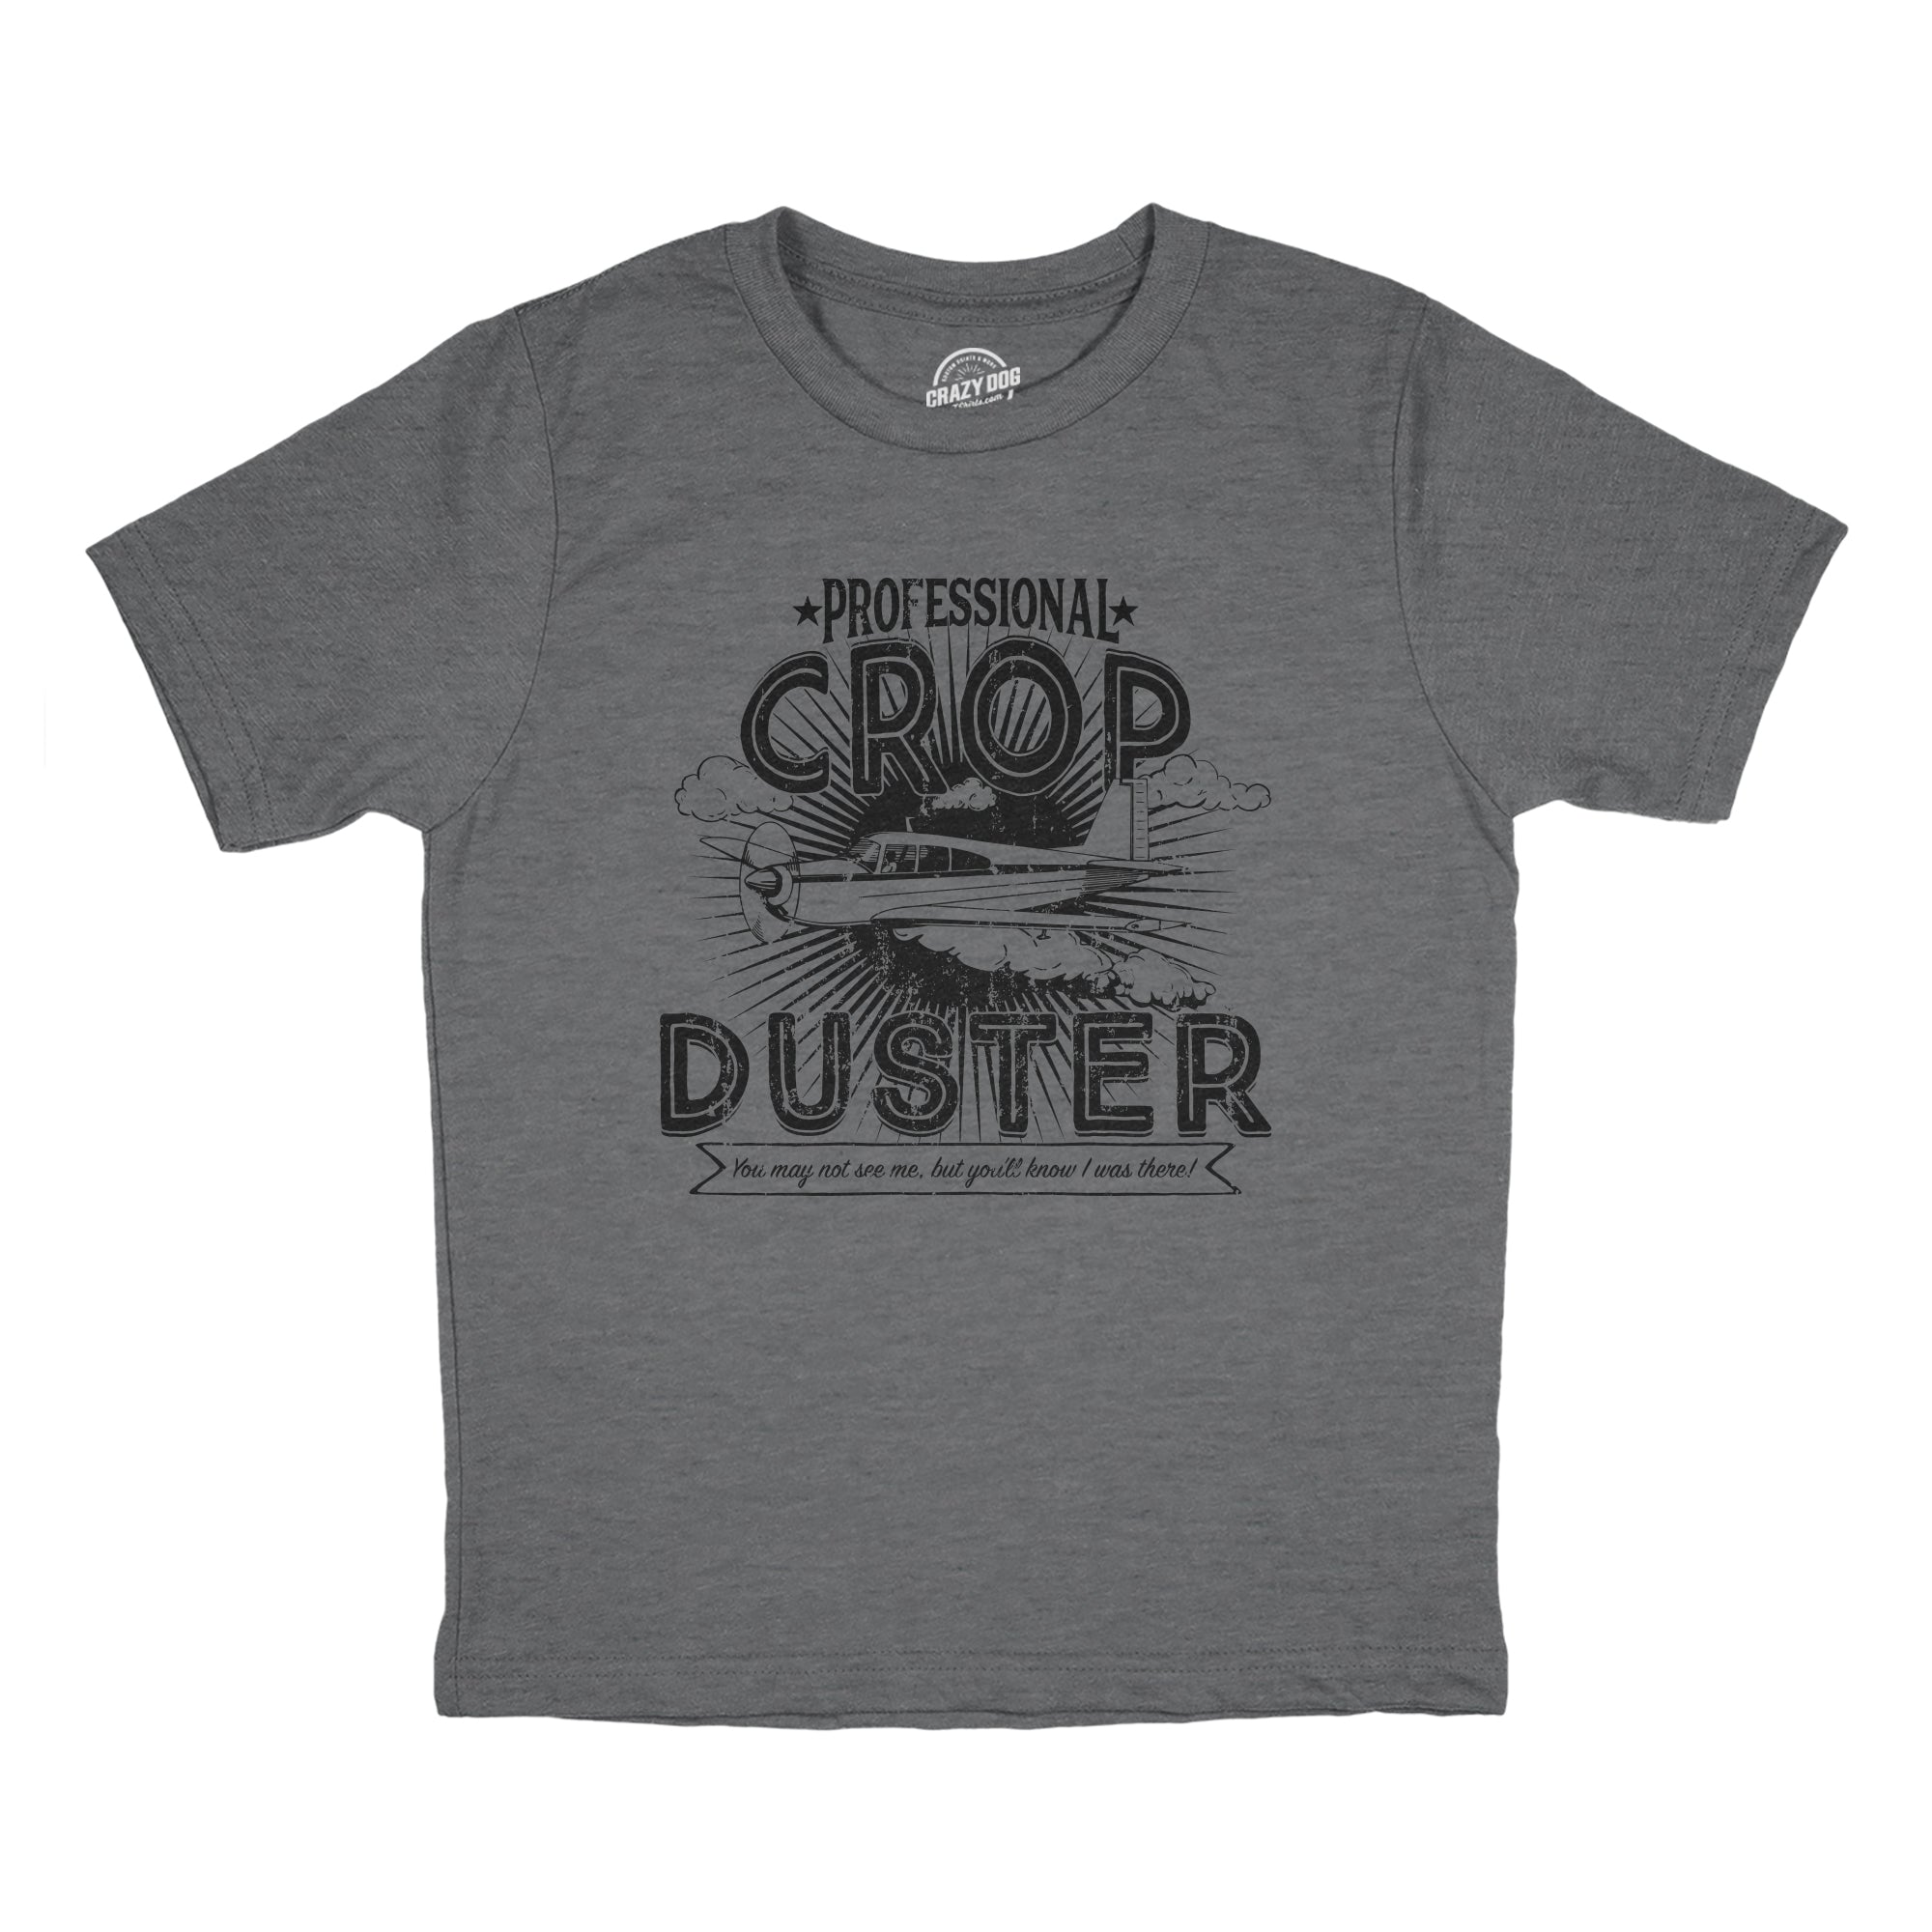 Funny Dark Heather Grey - DUSTER Professional Crop Duster Youth T Shirt Nerdy Toilet Sarcastic Tee